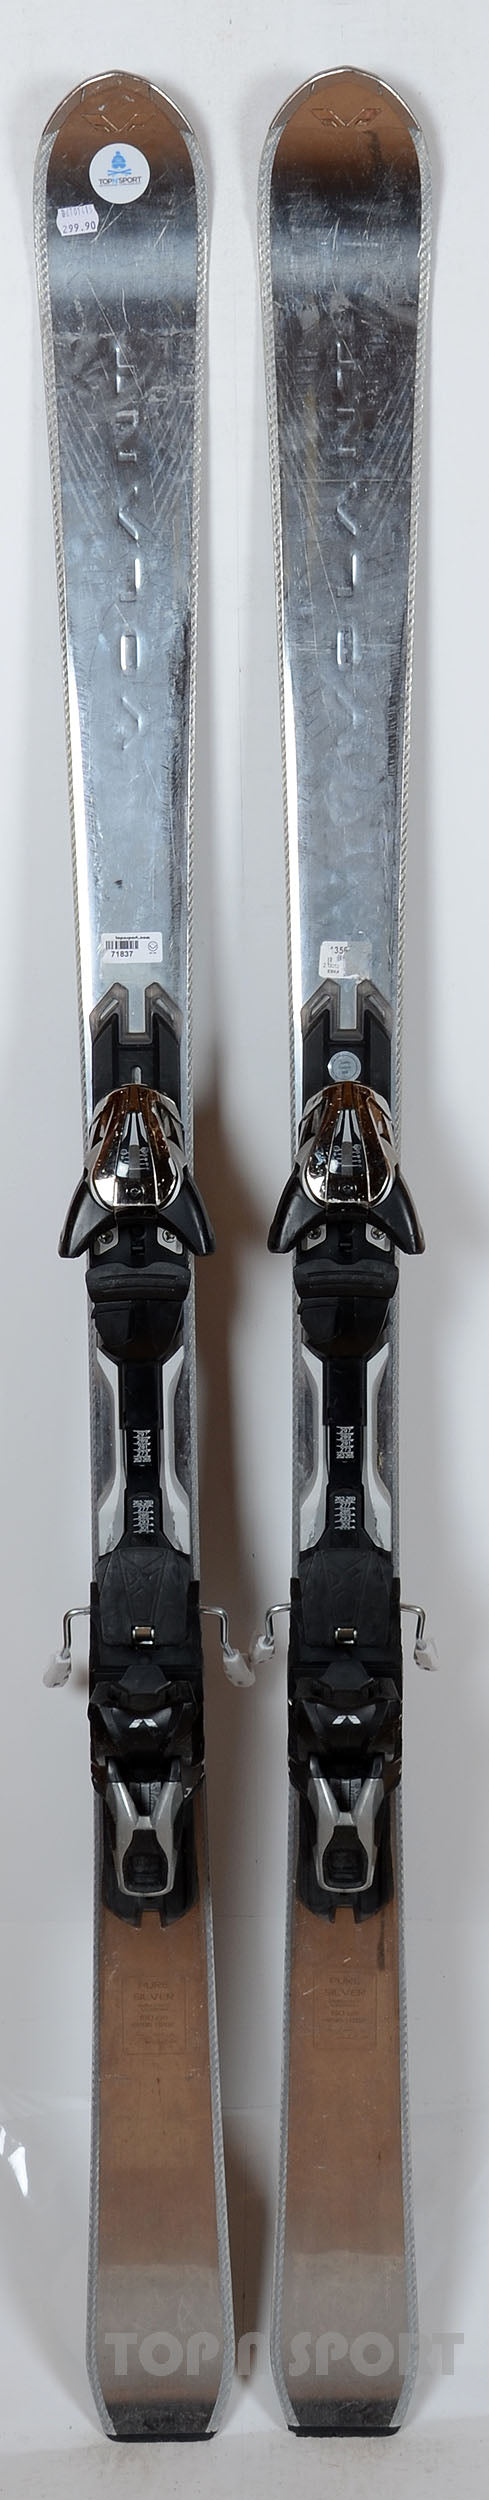 Volant PURE SILVER Arg - skis d'occasion